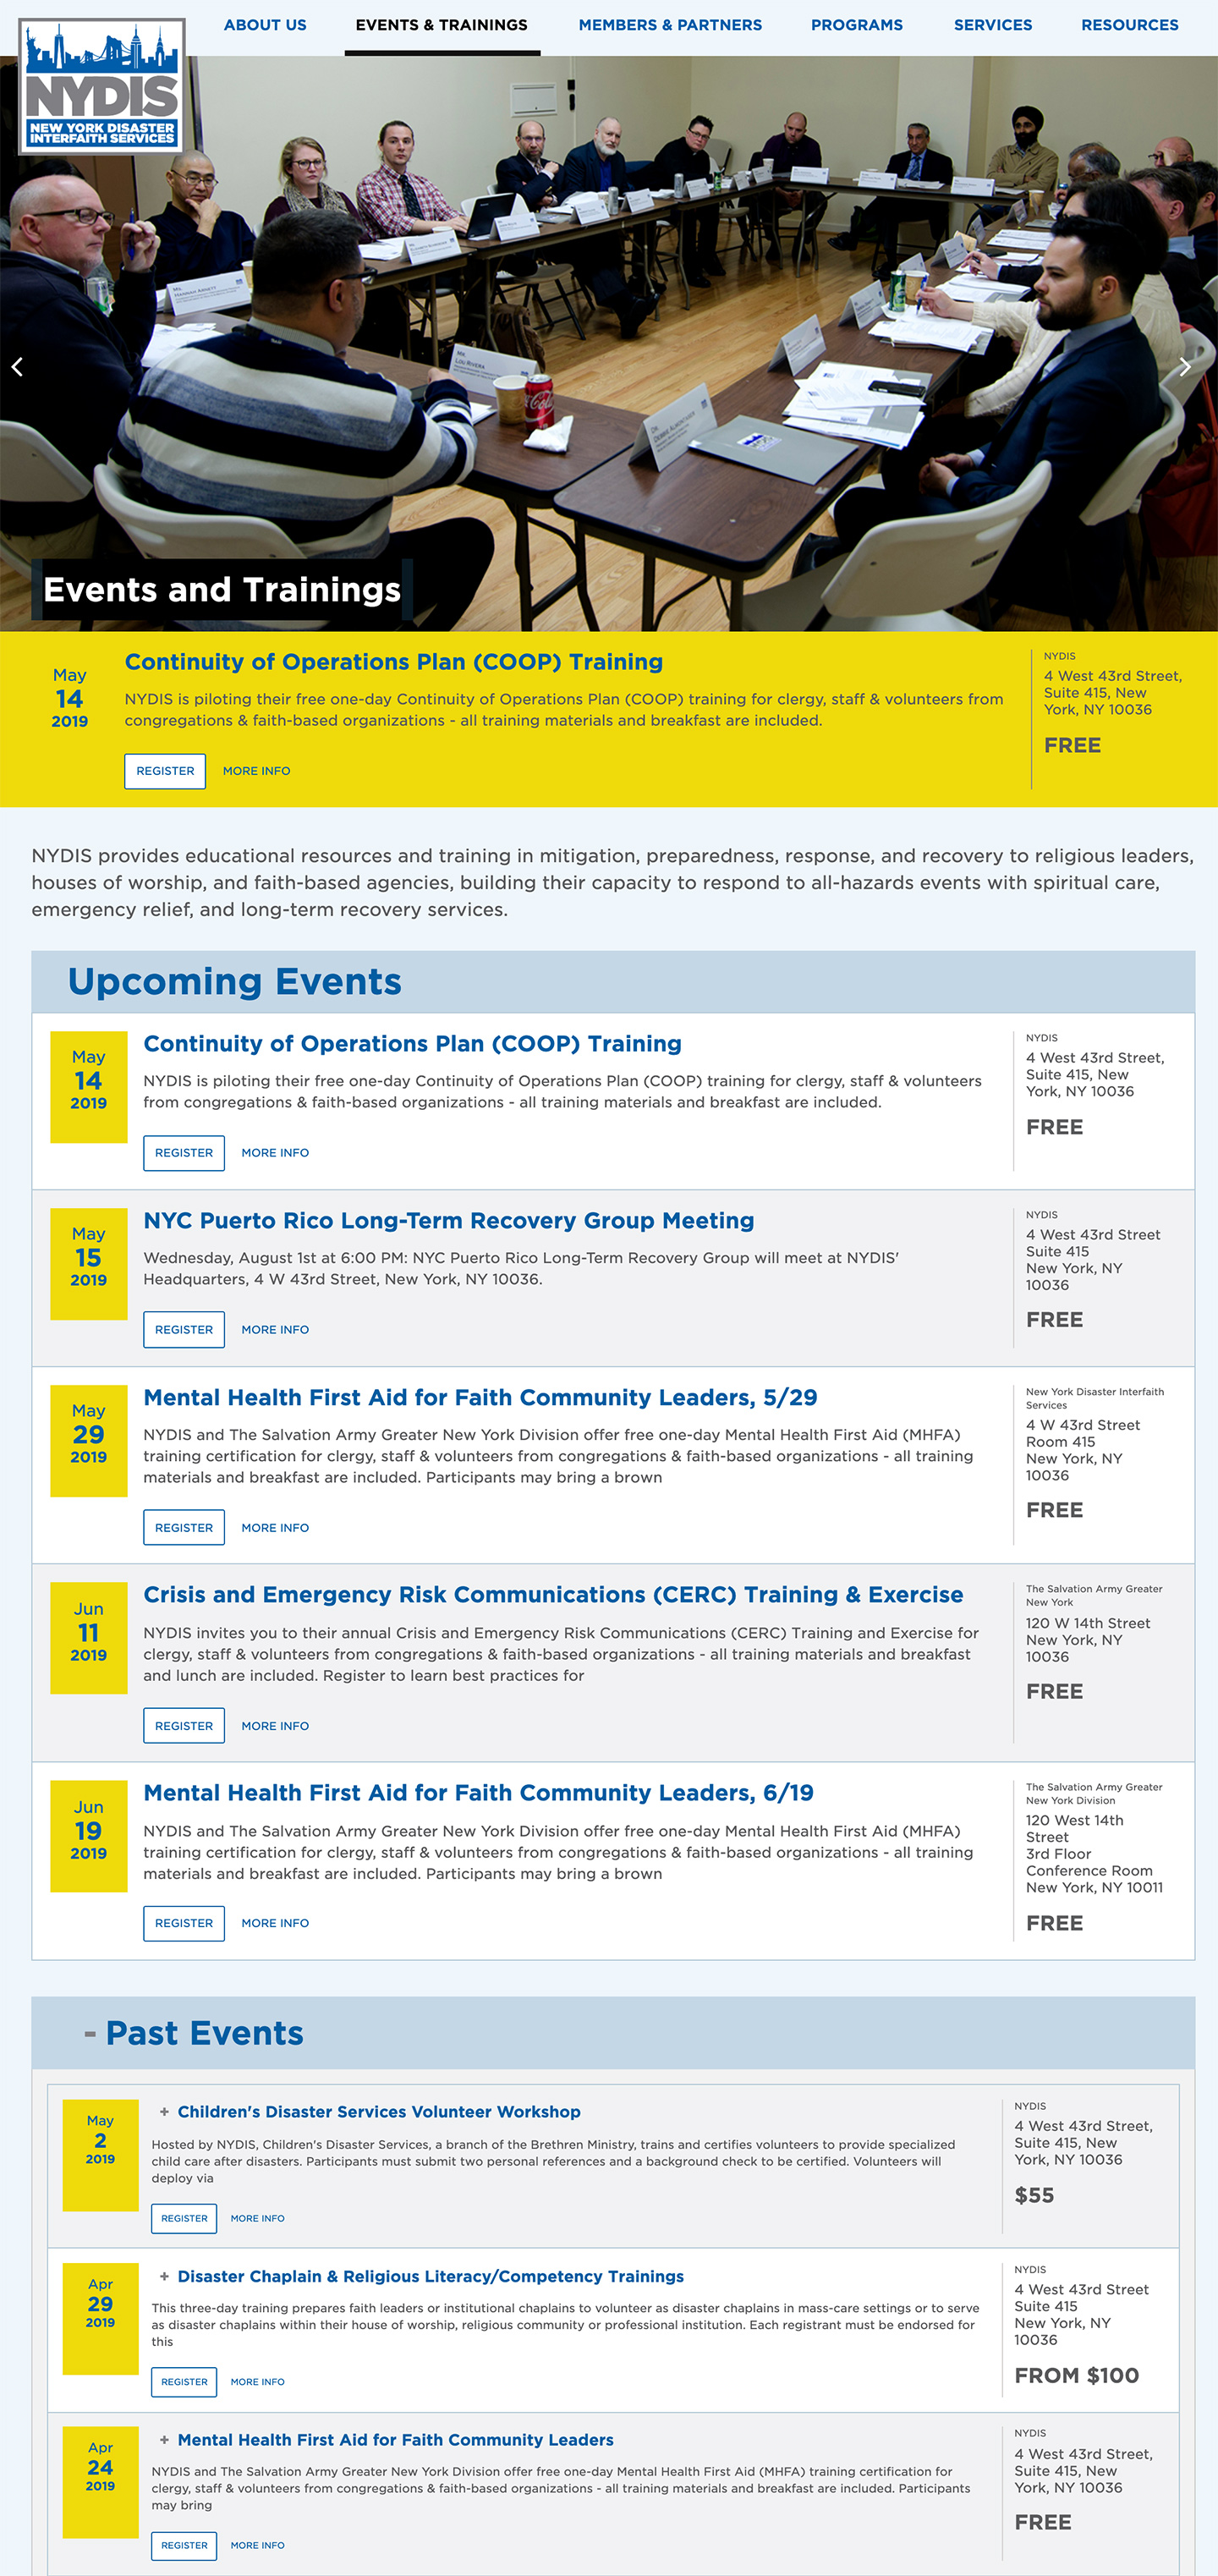 NYDIS: New York Disaster Interfaith Services: Automated Events Archive syncs with Eventbrite